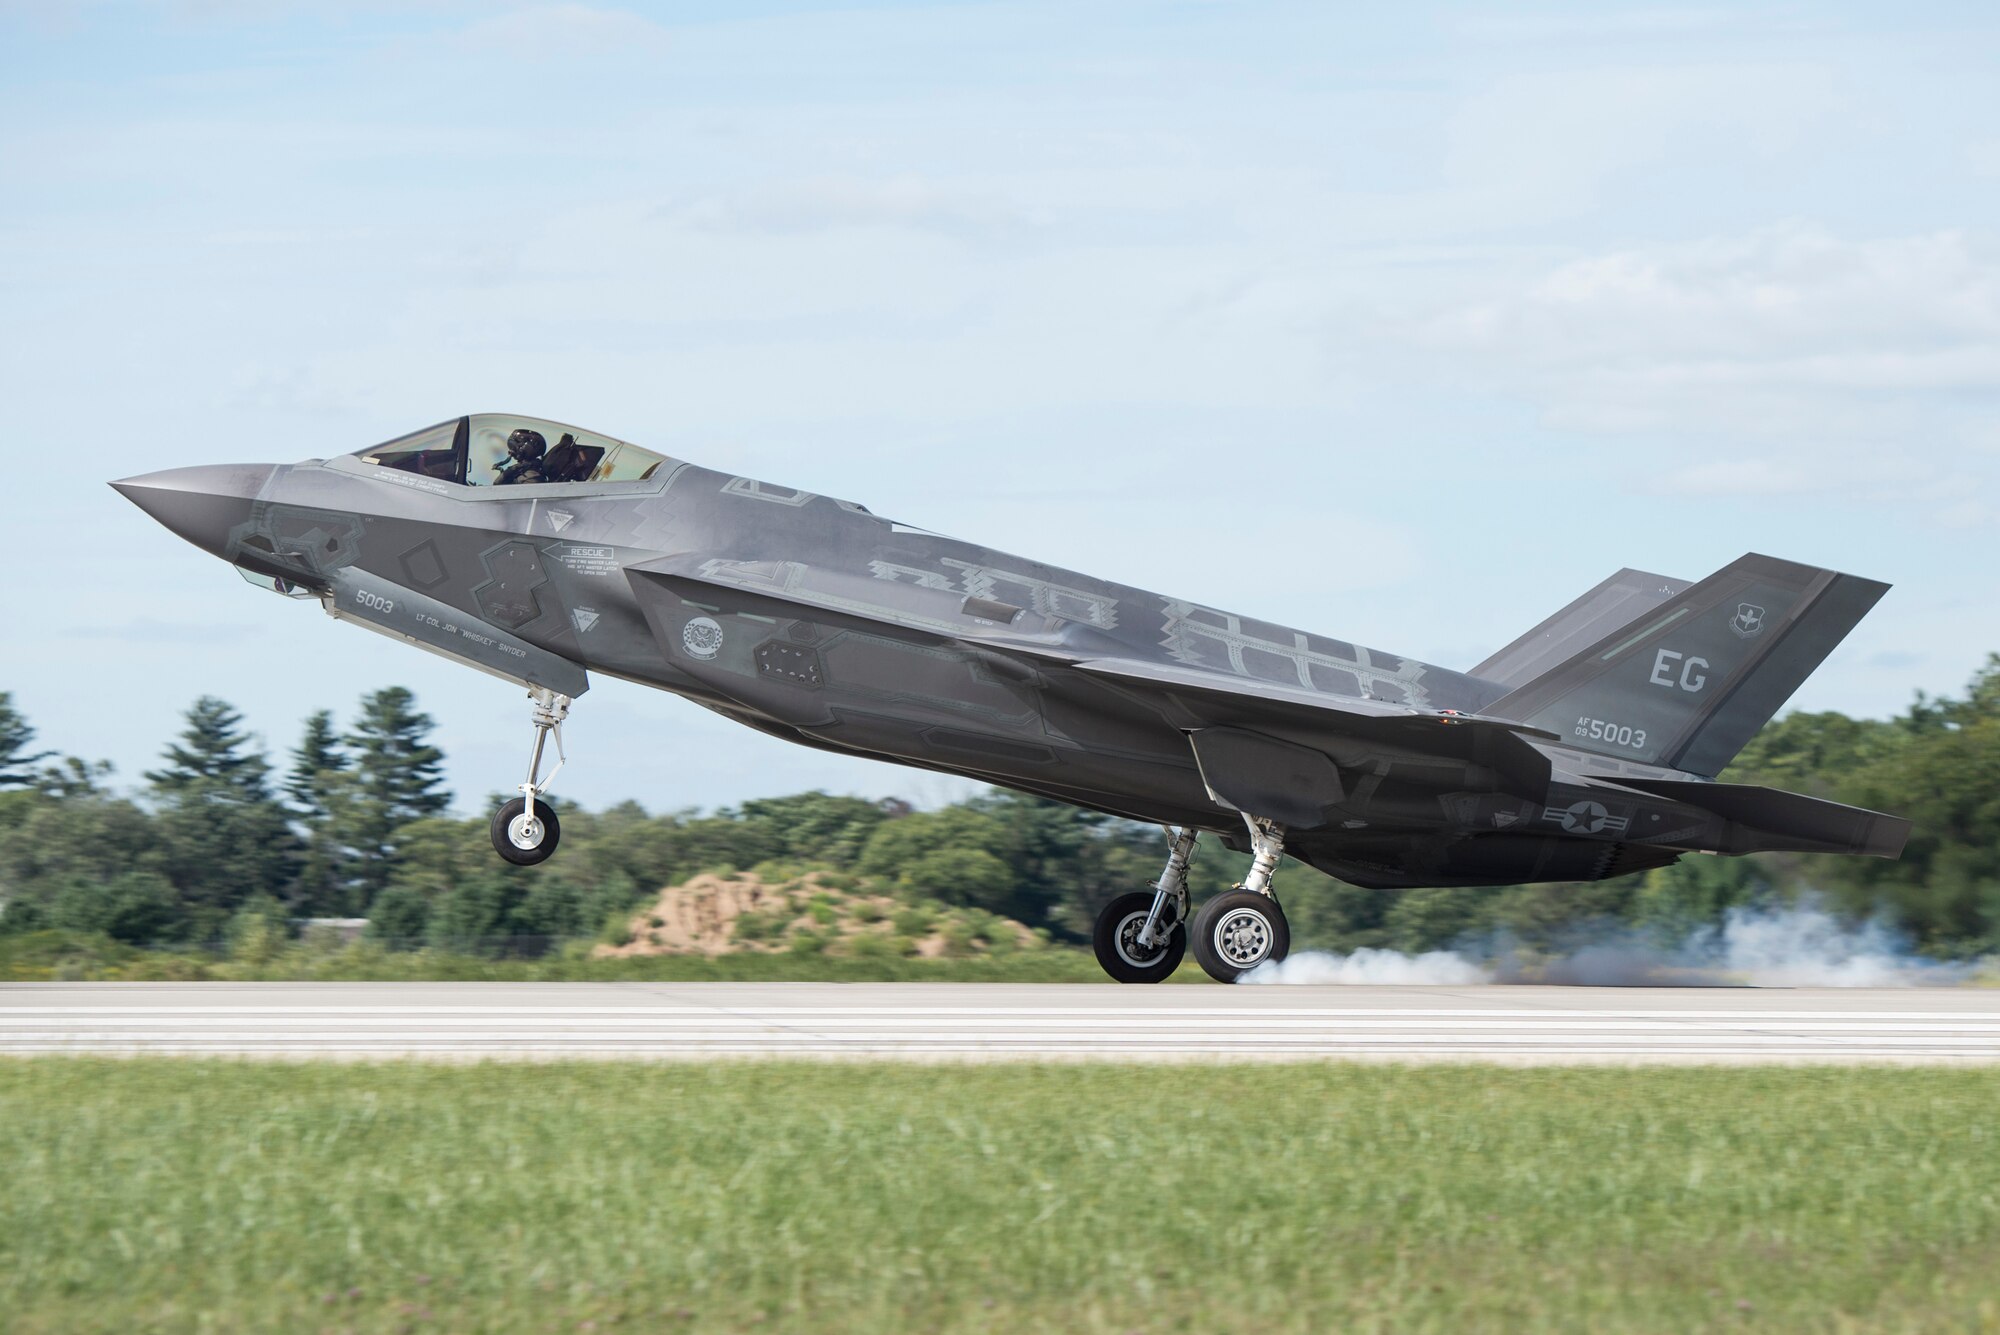 A 33rd Fighter Wing F-35A lands at Volk Field, Wis. Aug. 23, 2016, during Northern Lightning. Northern Lightning is a tactical-level, joint training exercise that emphasizes fifth and fourth generation assets engaged in a contested, degraded environment. (U.S. Air Force photo by Senior Airman Stormy Archer)